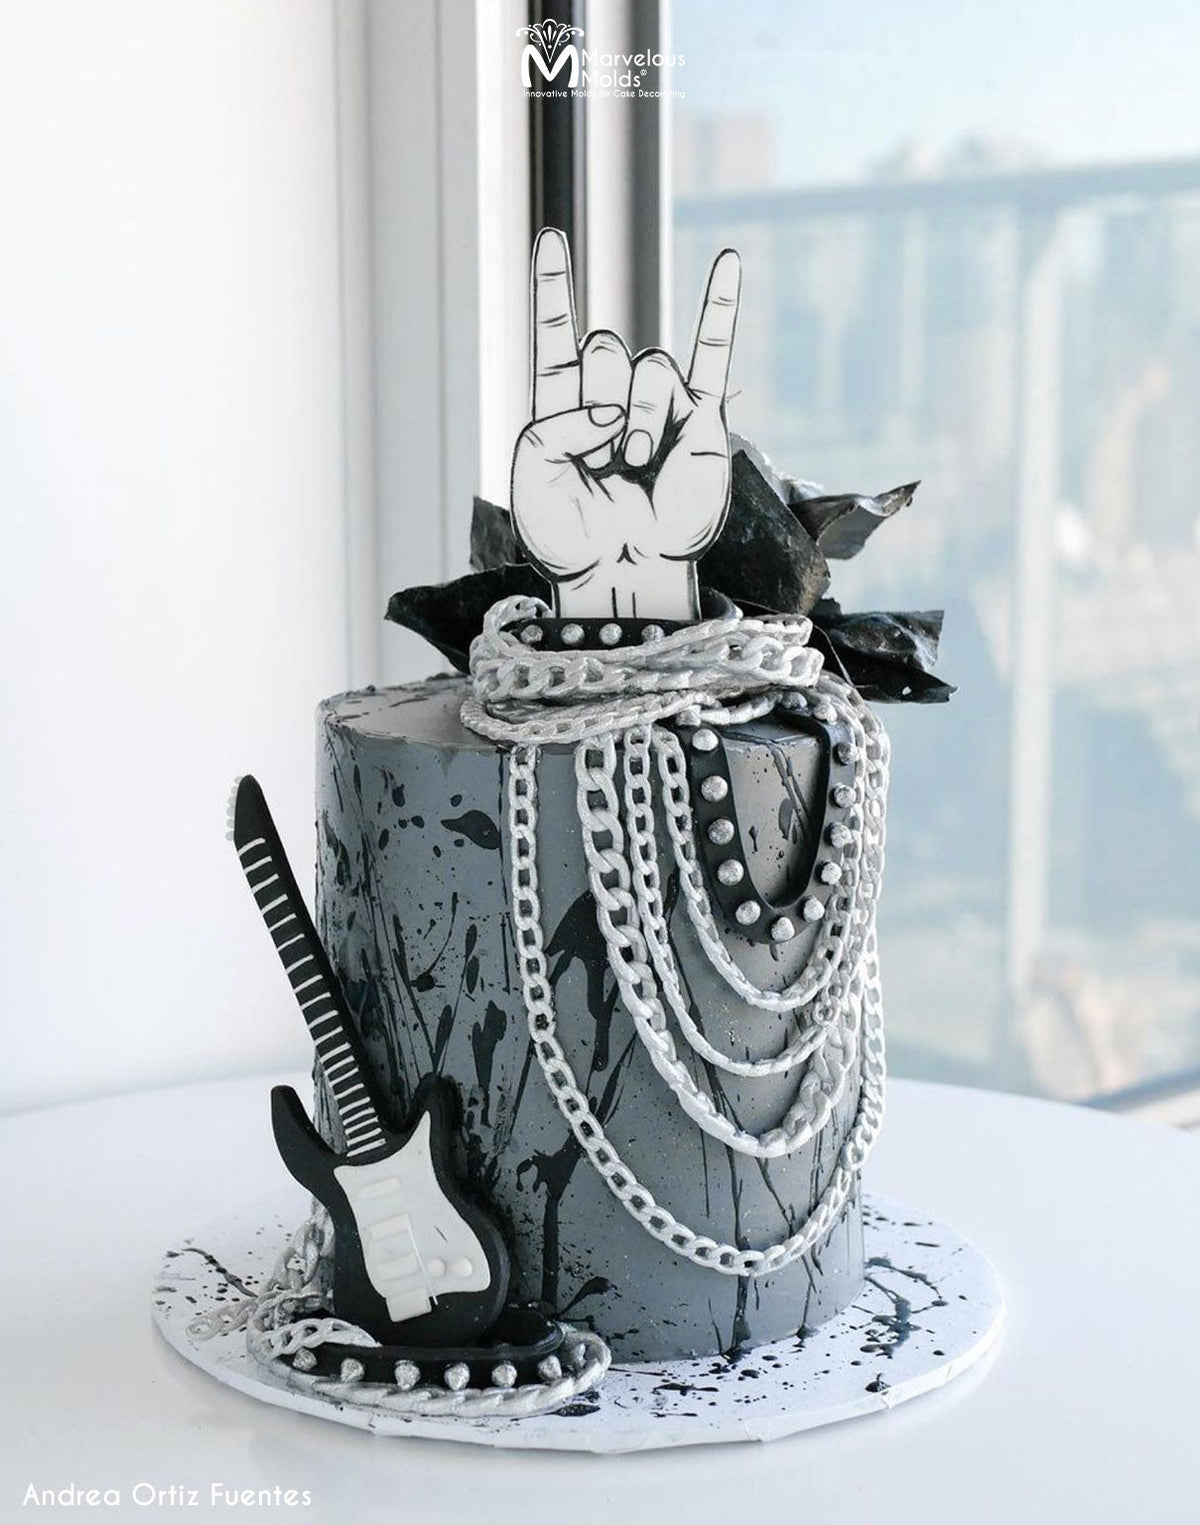 Rock Star Birthday Cake with Studded Straps and Chains, Created Using the Marvelous Molds Medium Chain PinchPro Silicone Mold for Cake Decorating